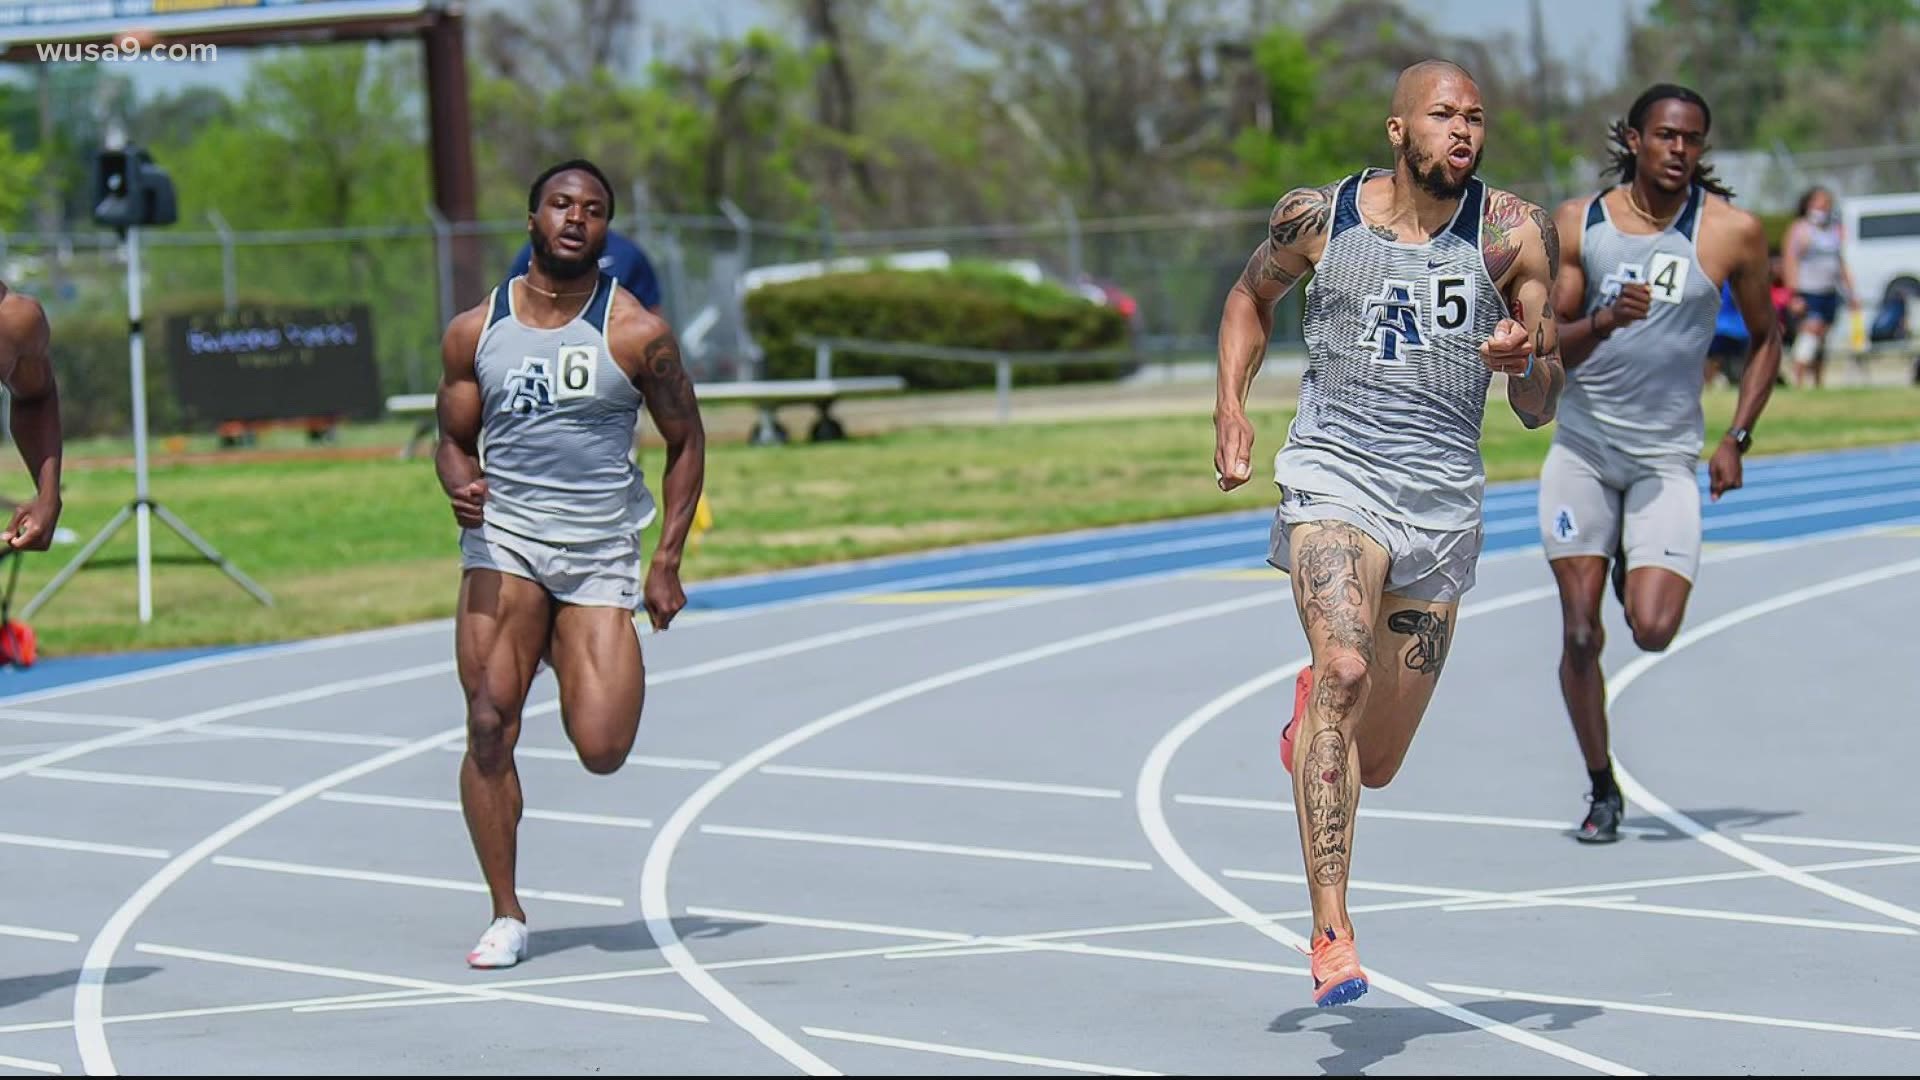 Trevor Stewart is one of the first members of the North Carolina A&T track team to make the Olympics since 1992.